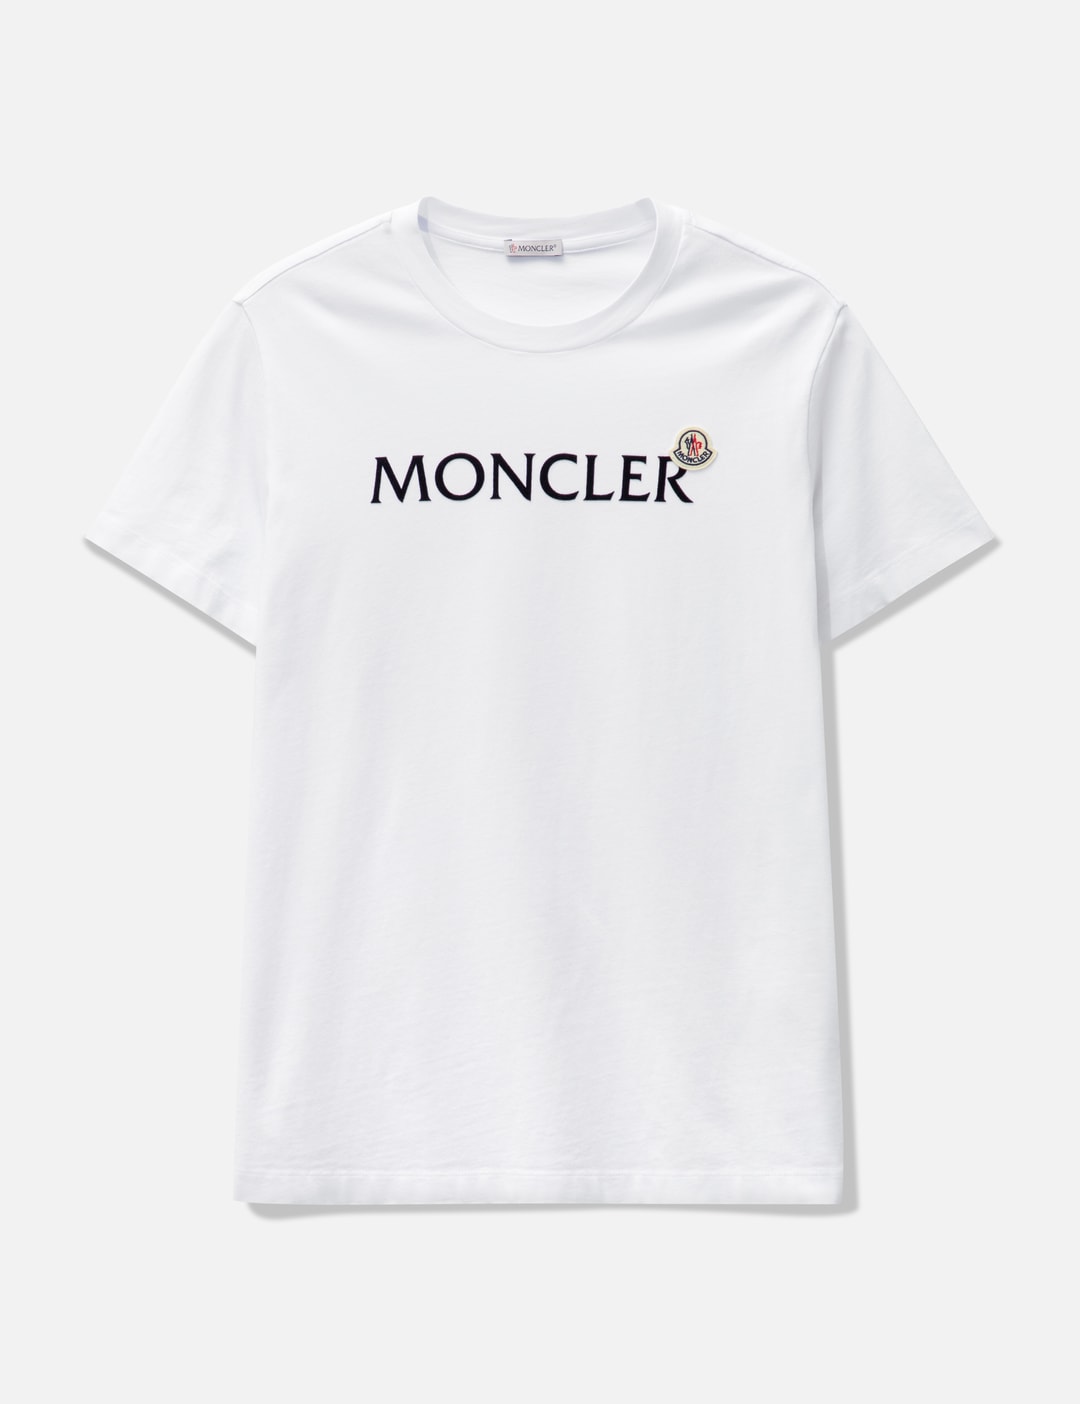 Moncler - Moncler Logo T-Shirts (Pack of 3)  HBX - Globally Curated  Fashion and Lifestyle by Hypebeast